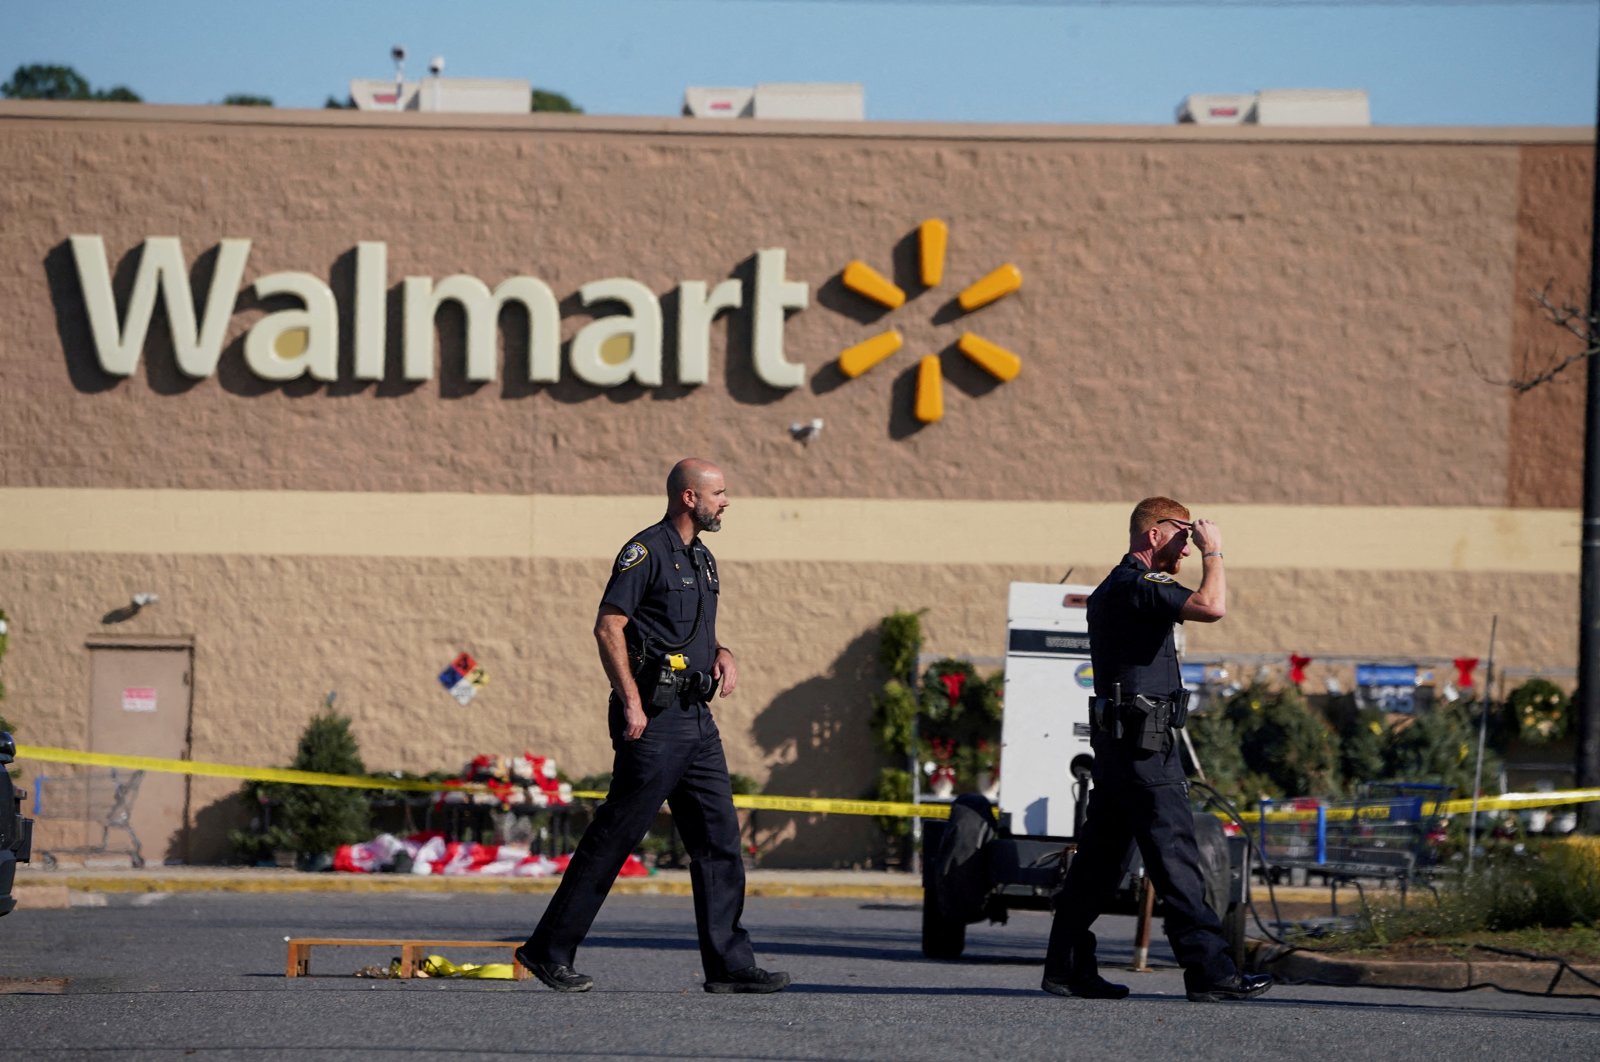 Police walk through the parking lot after a mass shooting at a Walmart in Chesapeake, Virginia, U.S., Nov. 23, 2022. (Reuters Photo)